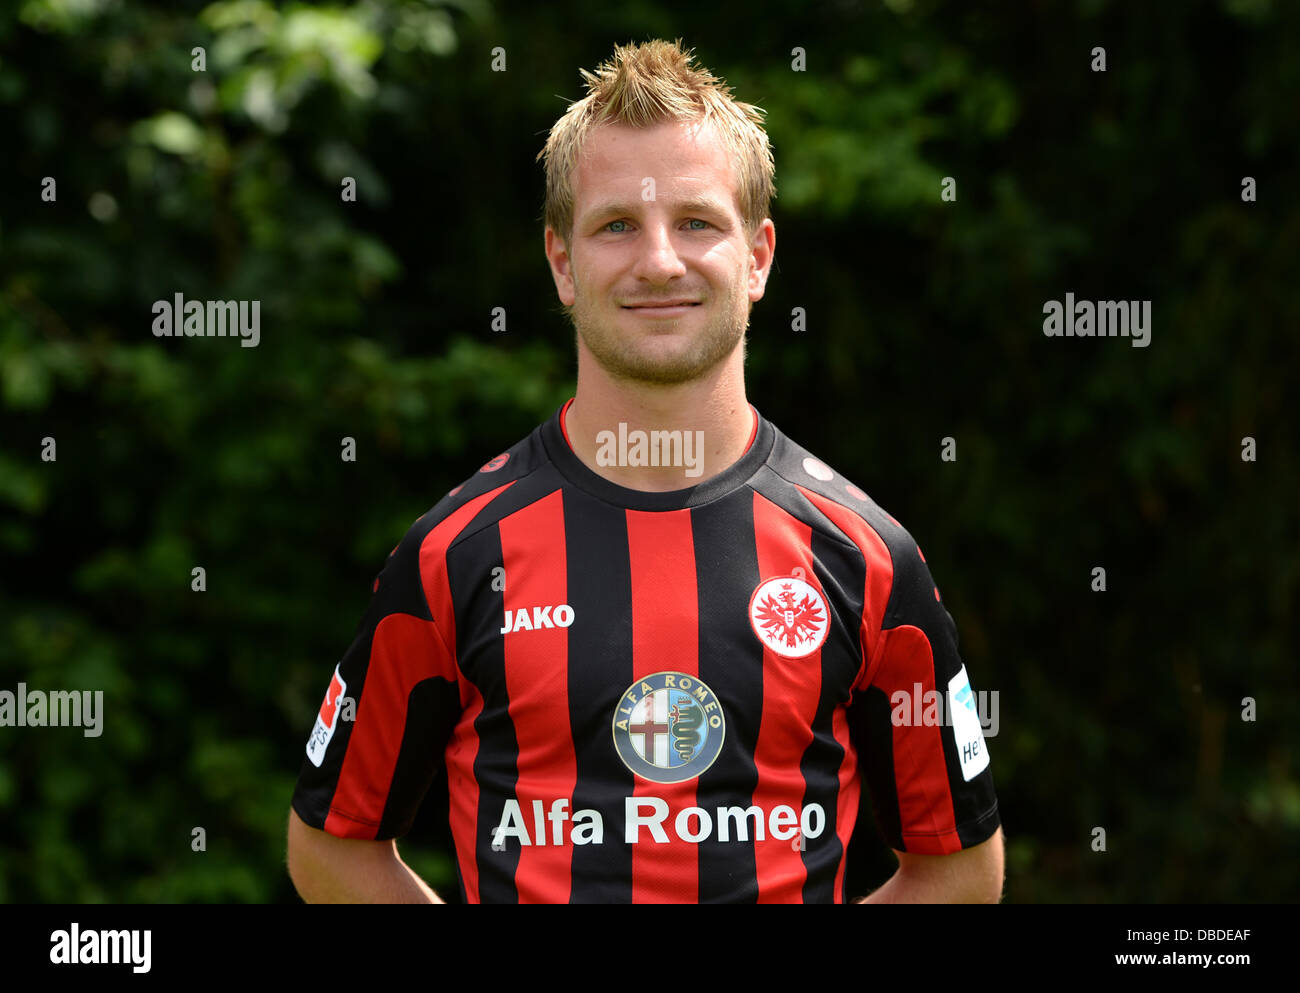 Stefan Aigner, player of German Bundesliga club Eintracht Frankfurt, during  the official photocall for the season 2013-14 on the 12th of July in 2013  at Commerzbank Arena in Frankfurt am Main (Hesse).